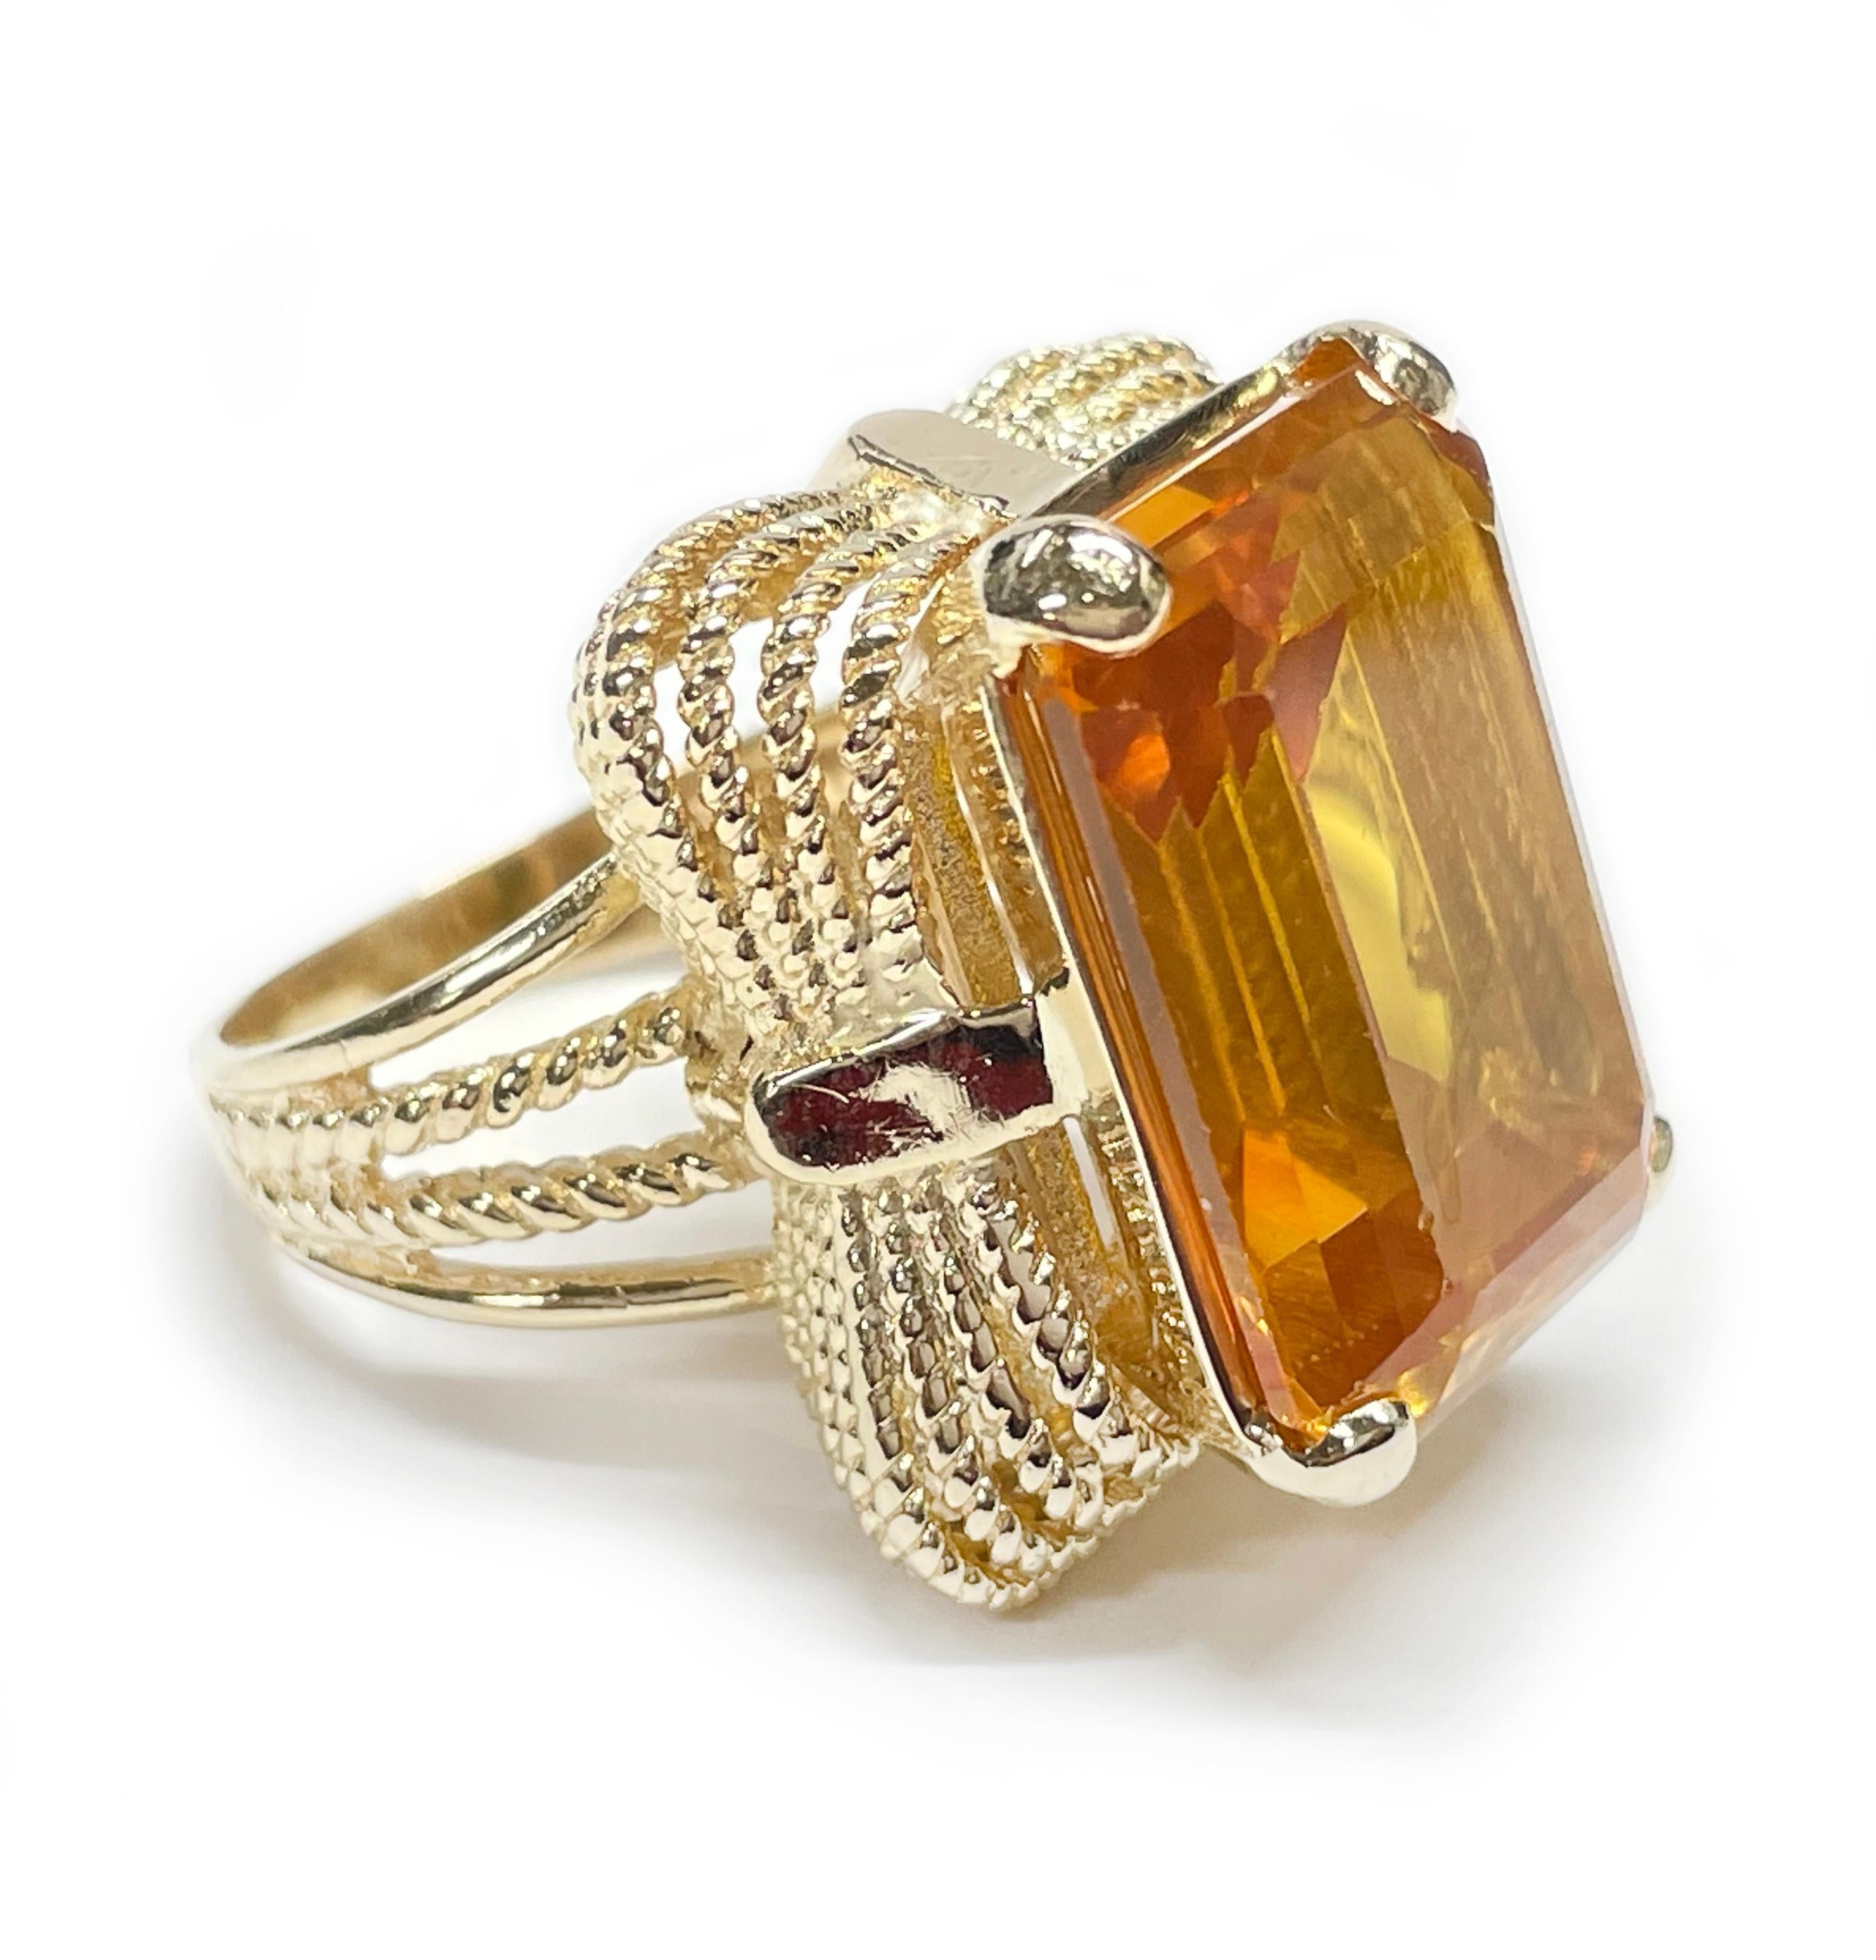 14 Karat Yellow Gold Citrine Cocktail Ring. The ring features an emerald cut 20 x 15mm prong-set golden Citrine. There are twisted wire scroll-like designs adorning all sides of the Citrine and the split band. The Citrine stone has light wear